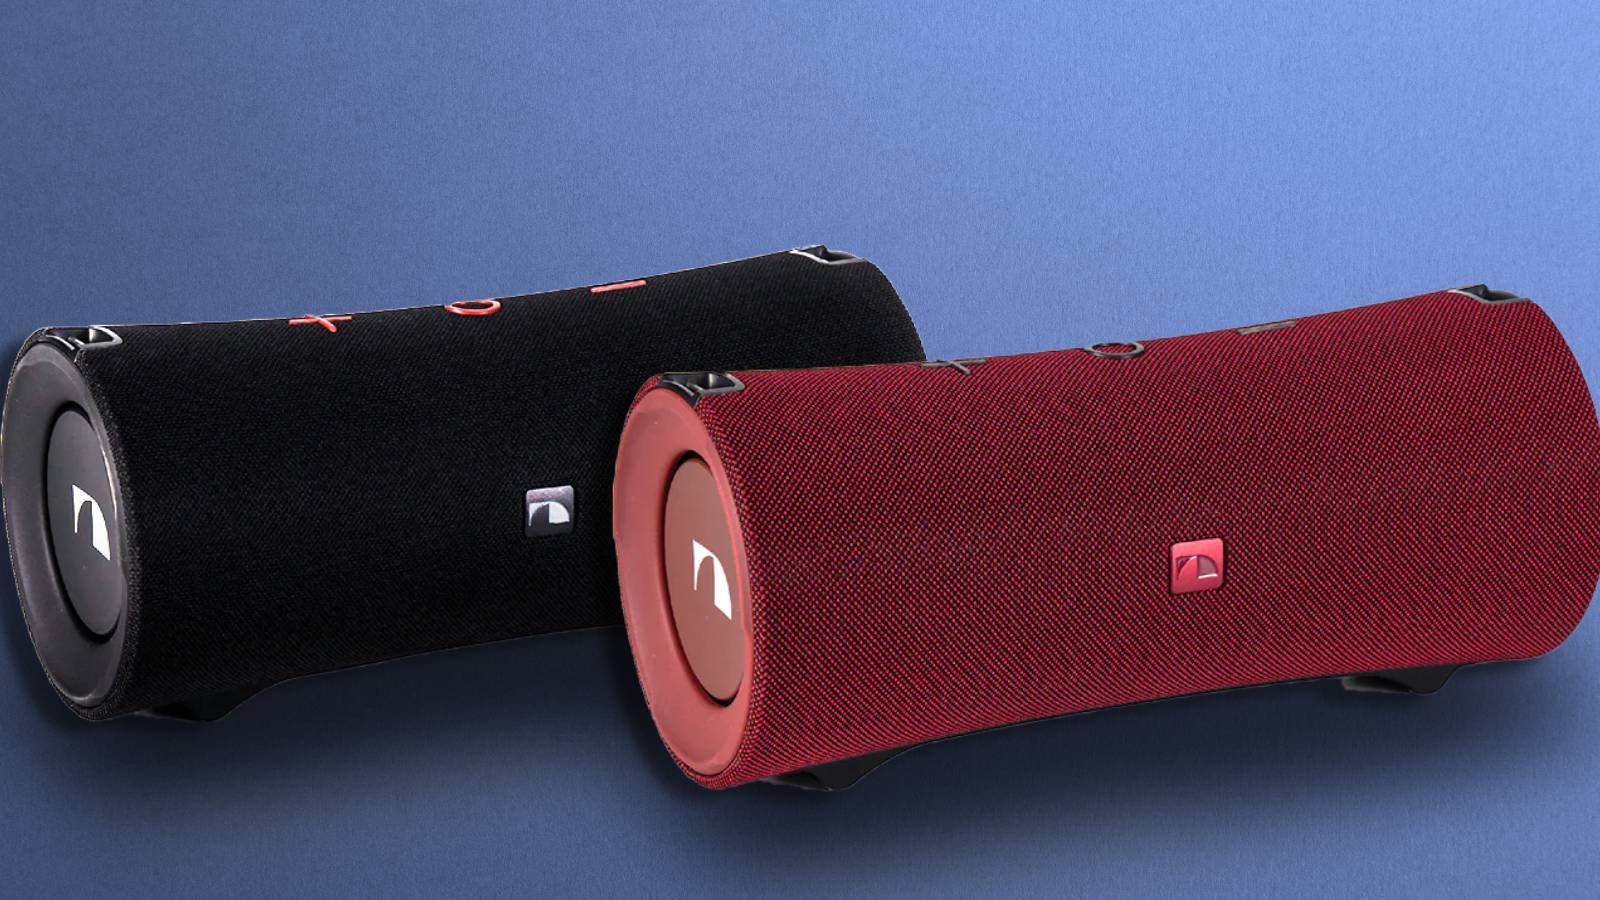 Save $150 on JBL's incredible Xtreme 2 wireless Bluetooth speaker - Dexerto